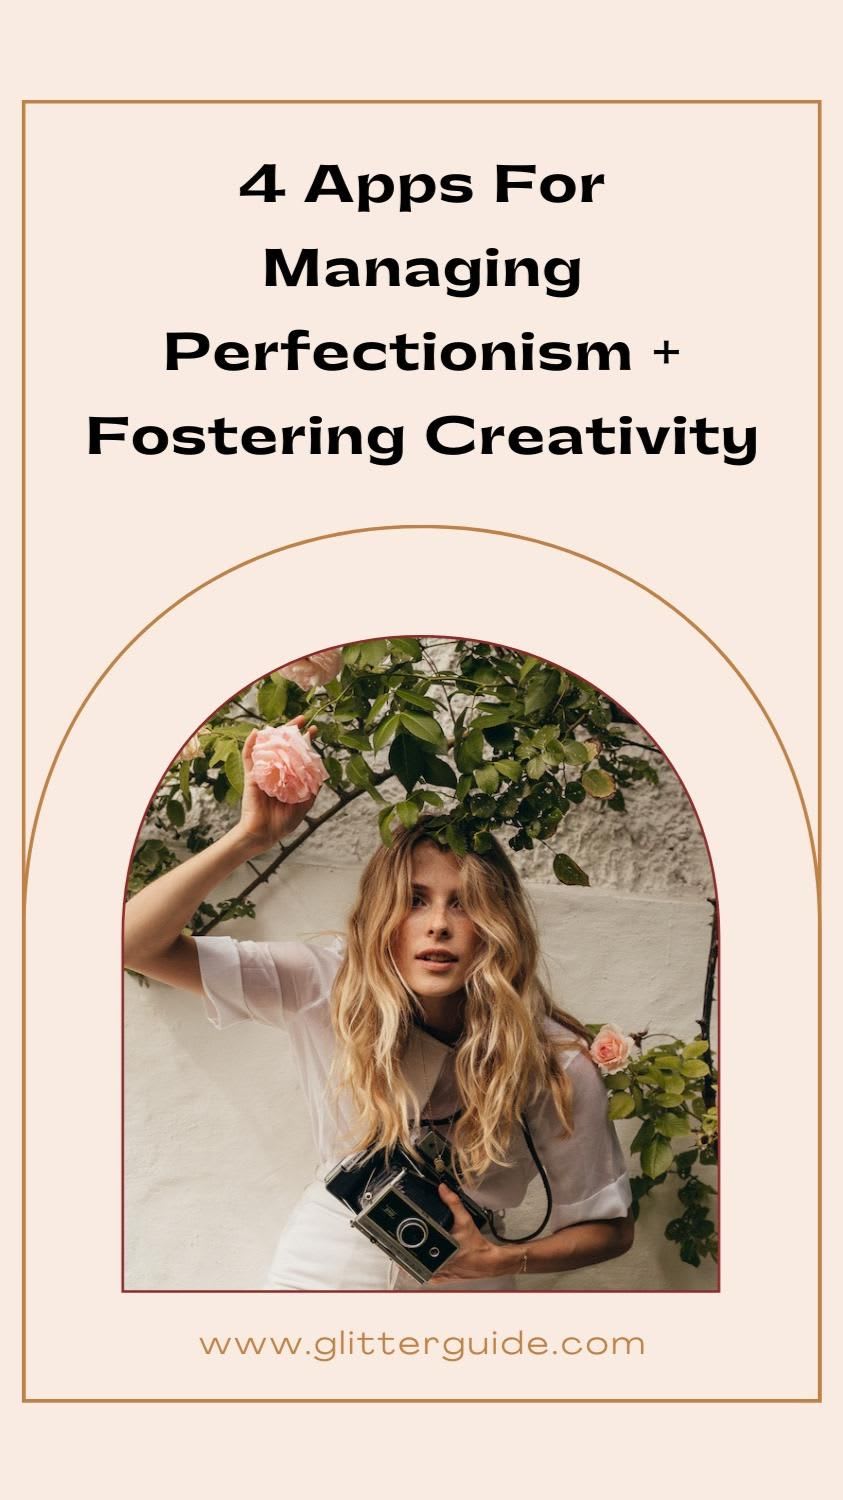 4 Apps For Managing Perfectionism + Fostering Creativity